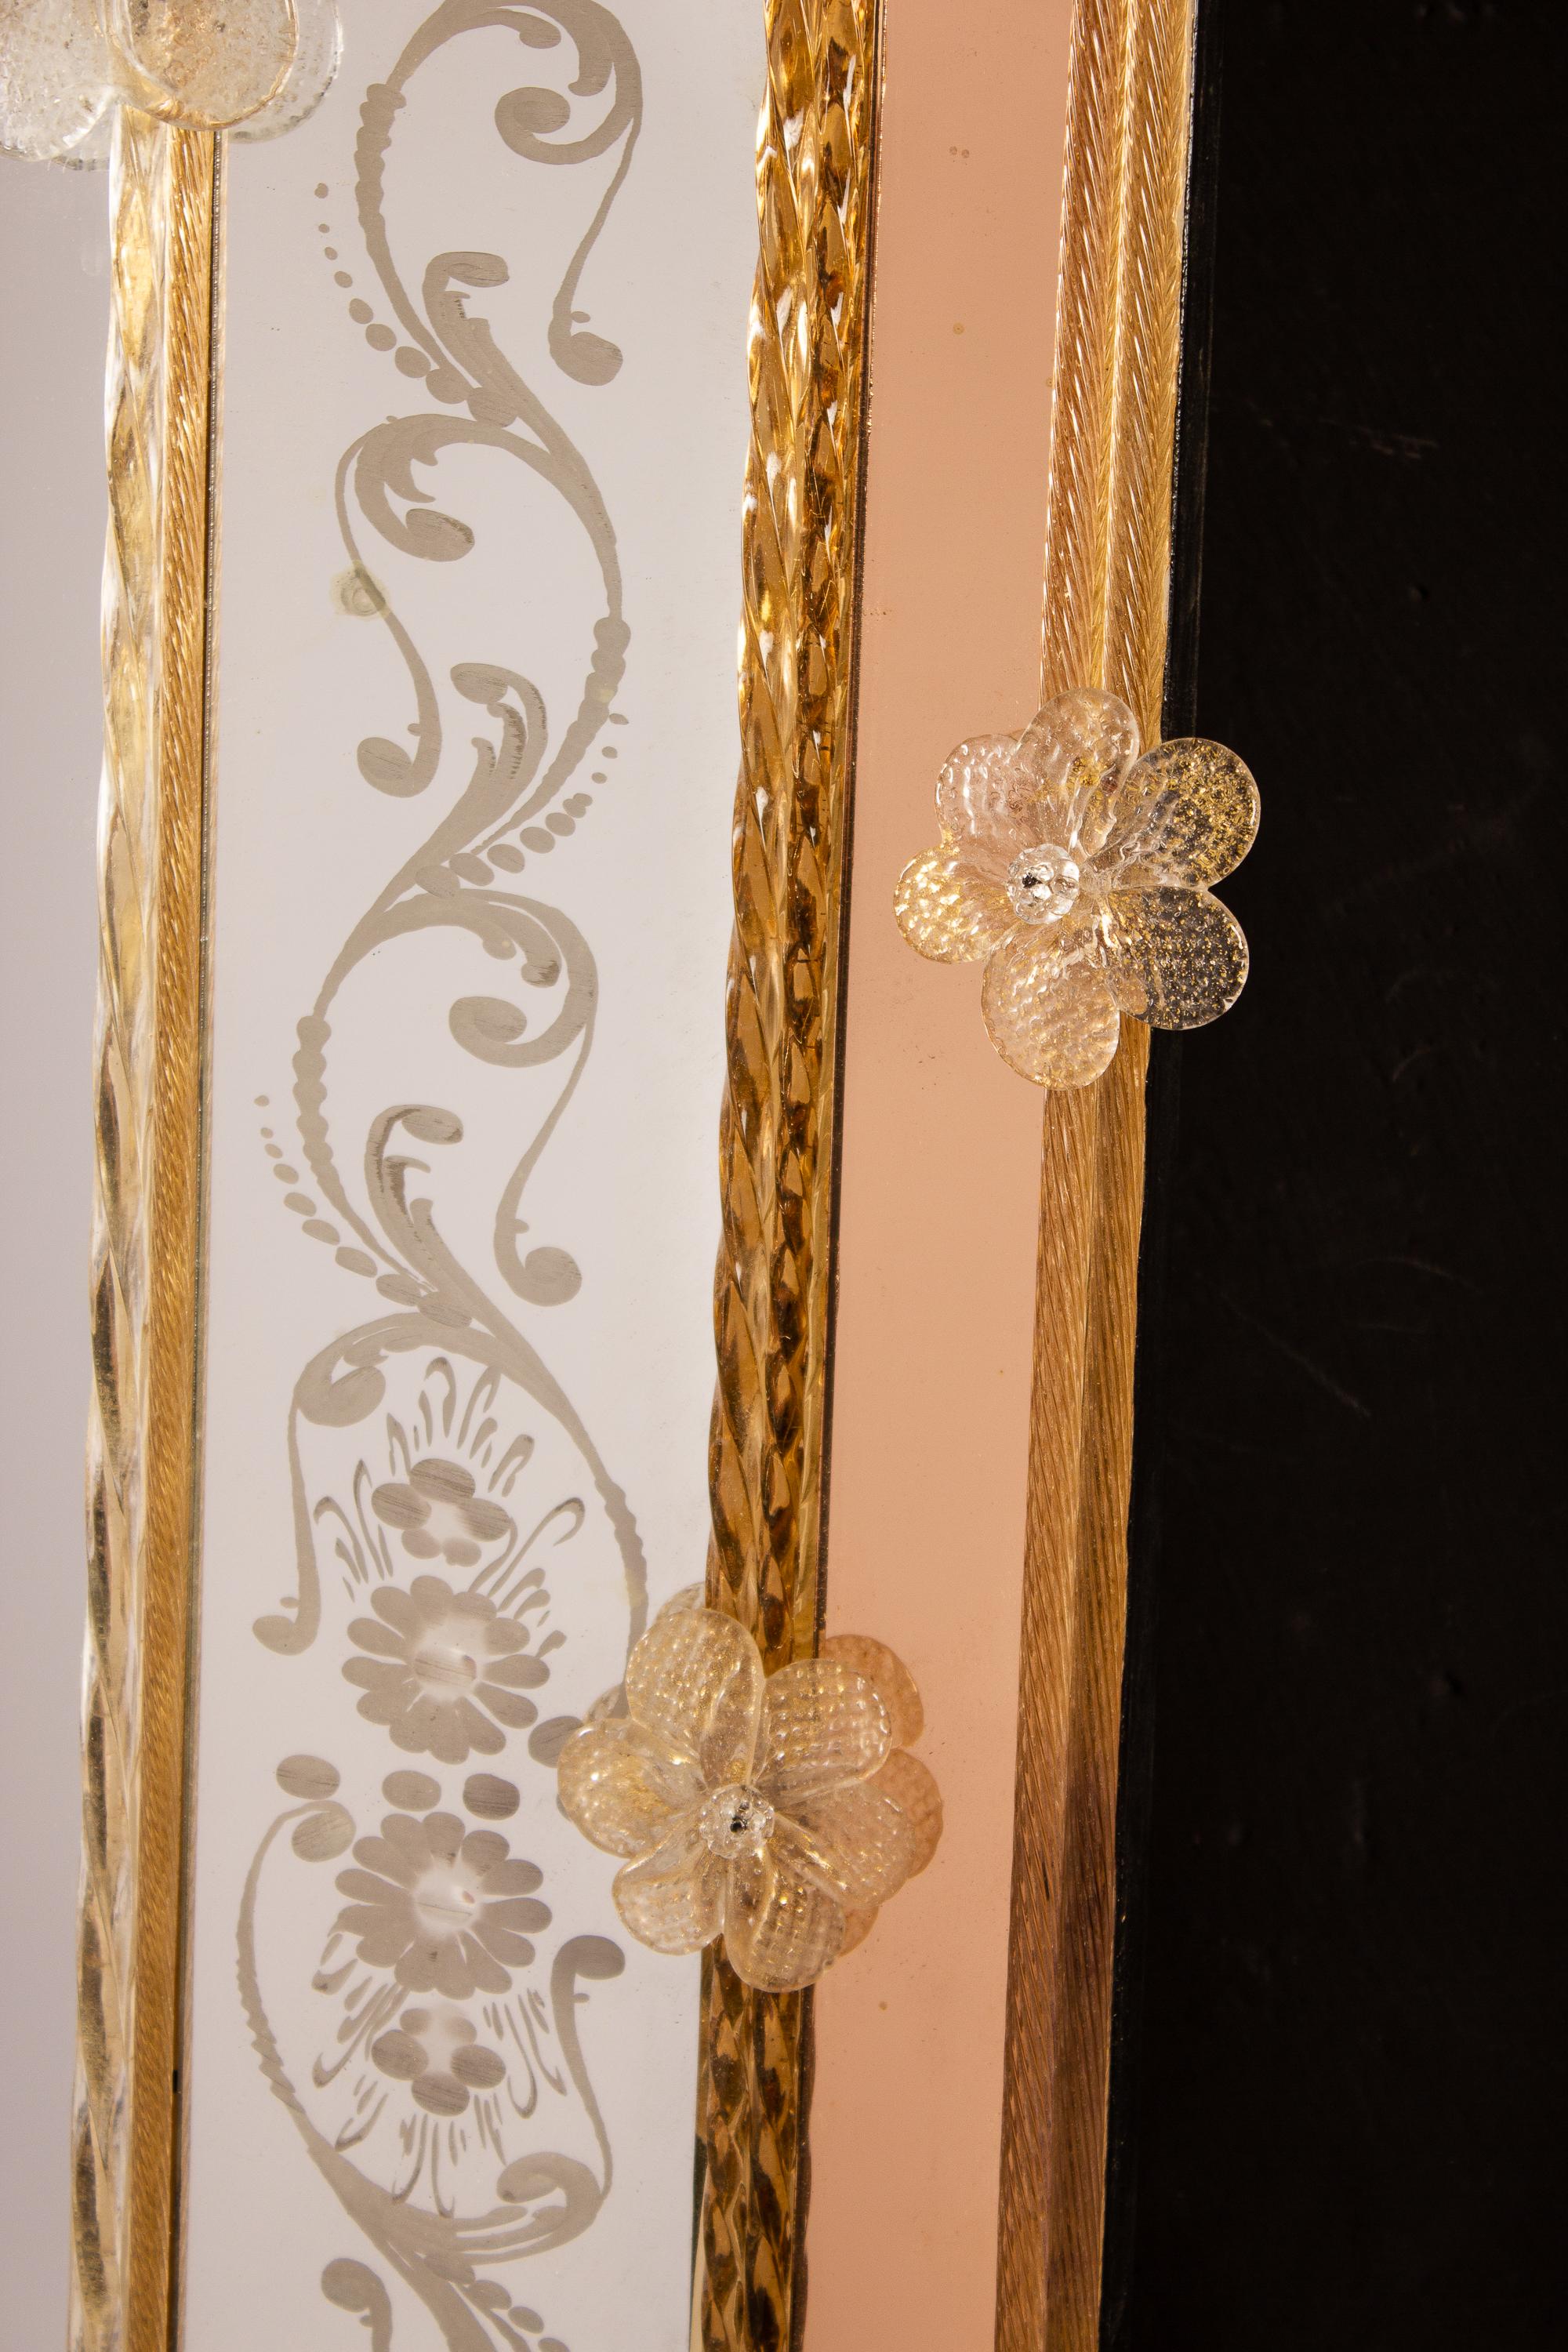 This beautiful Venetian mirror features etched floral motifs adorning the mirrored frame. Along the edges of the frame are glass rope accents and numerous glass gold flowers. Executed by the great Master of Murano Oscar Zanetti. 
The mirror is